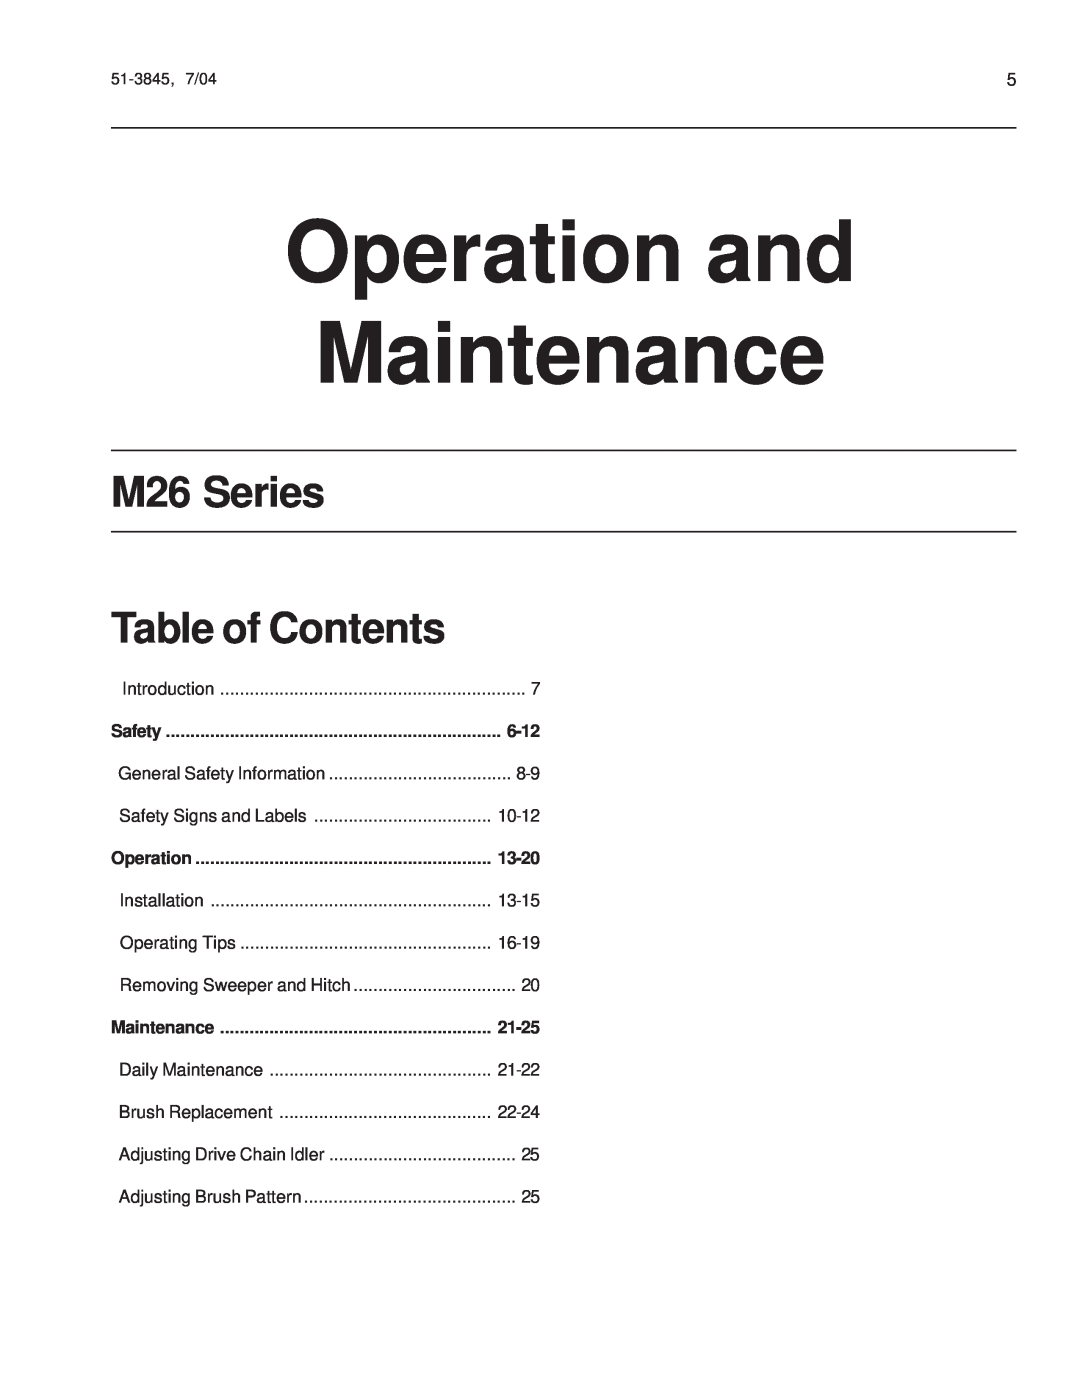 Snapper 151-3845 manual Operation and Maintenance, M26 Series, 6-12, 13-20, 21-25, Table of Contents 